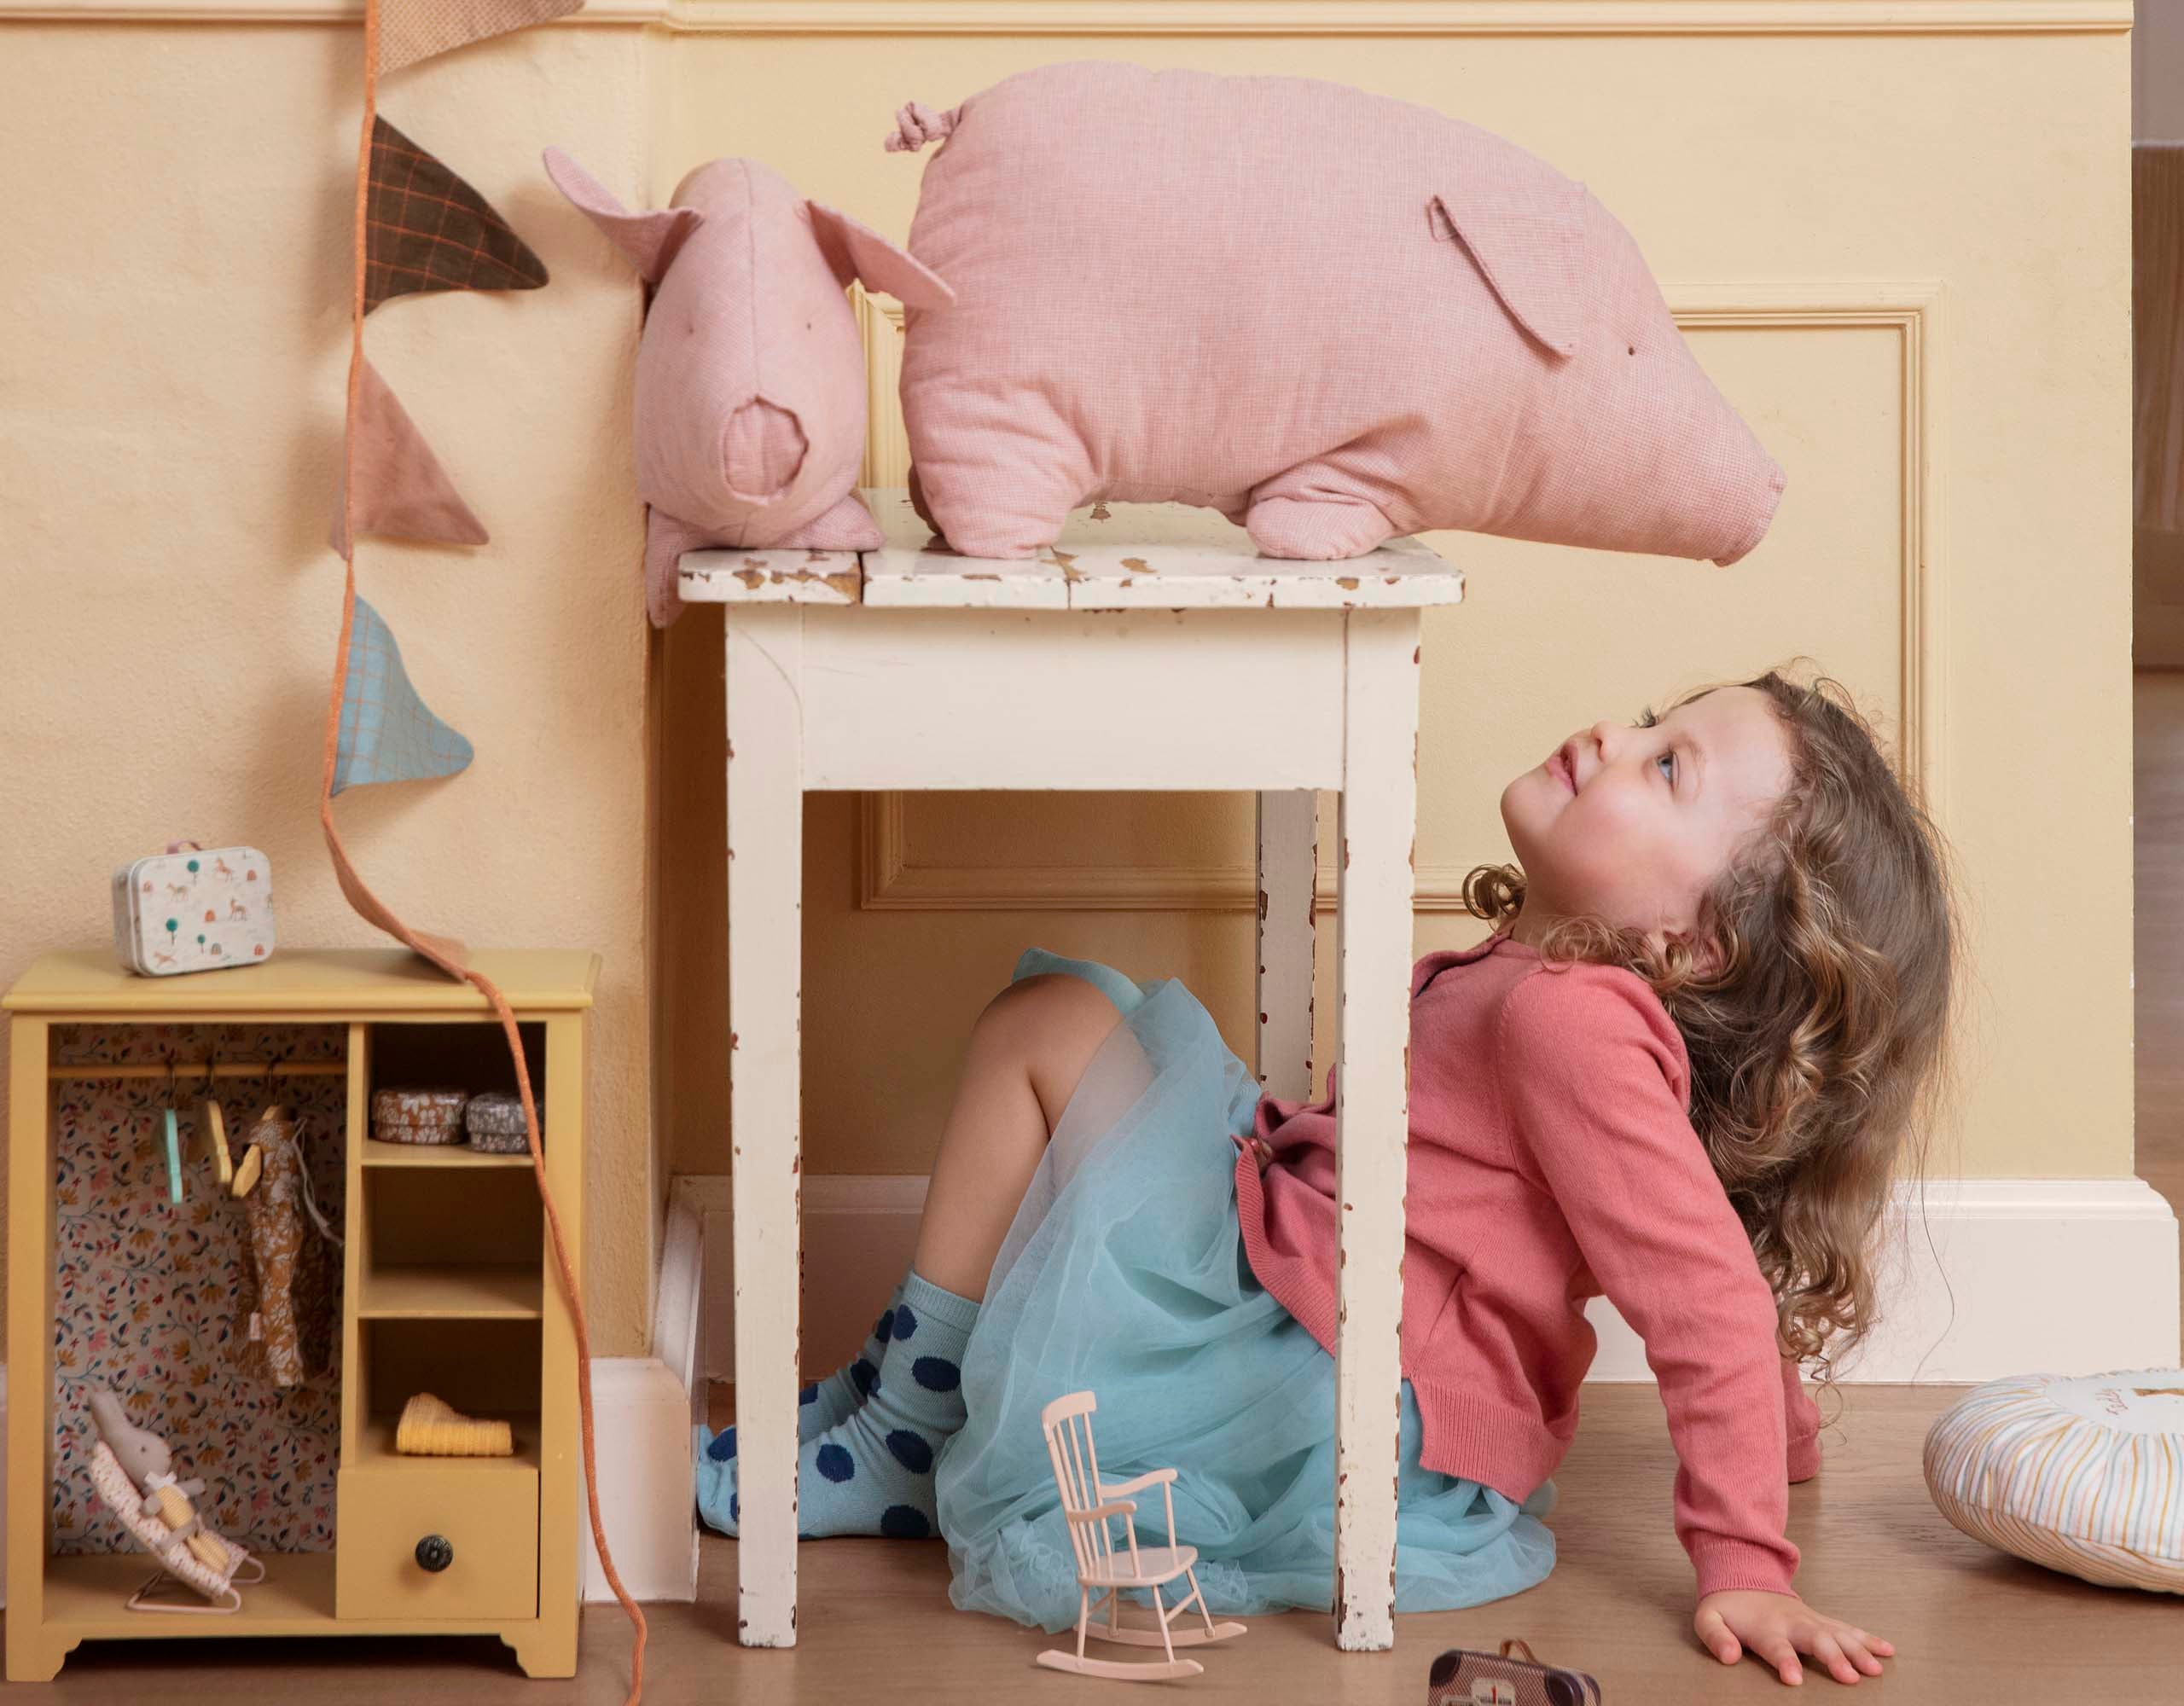 A child lies beneath a small table, gazing up at a large plush pig atop it in a cluttered playroom.